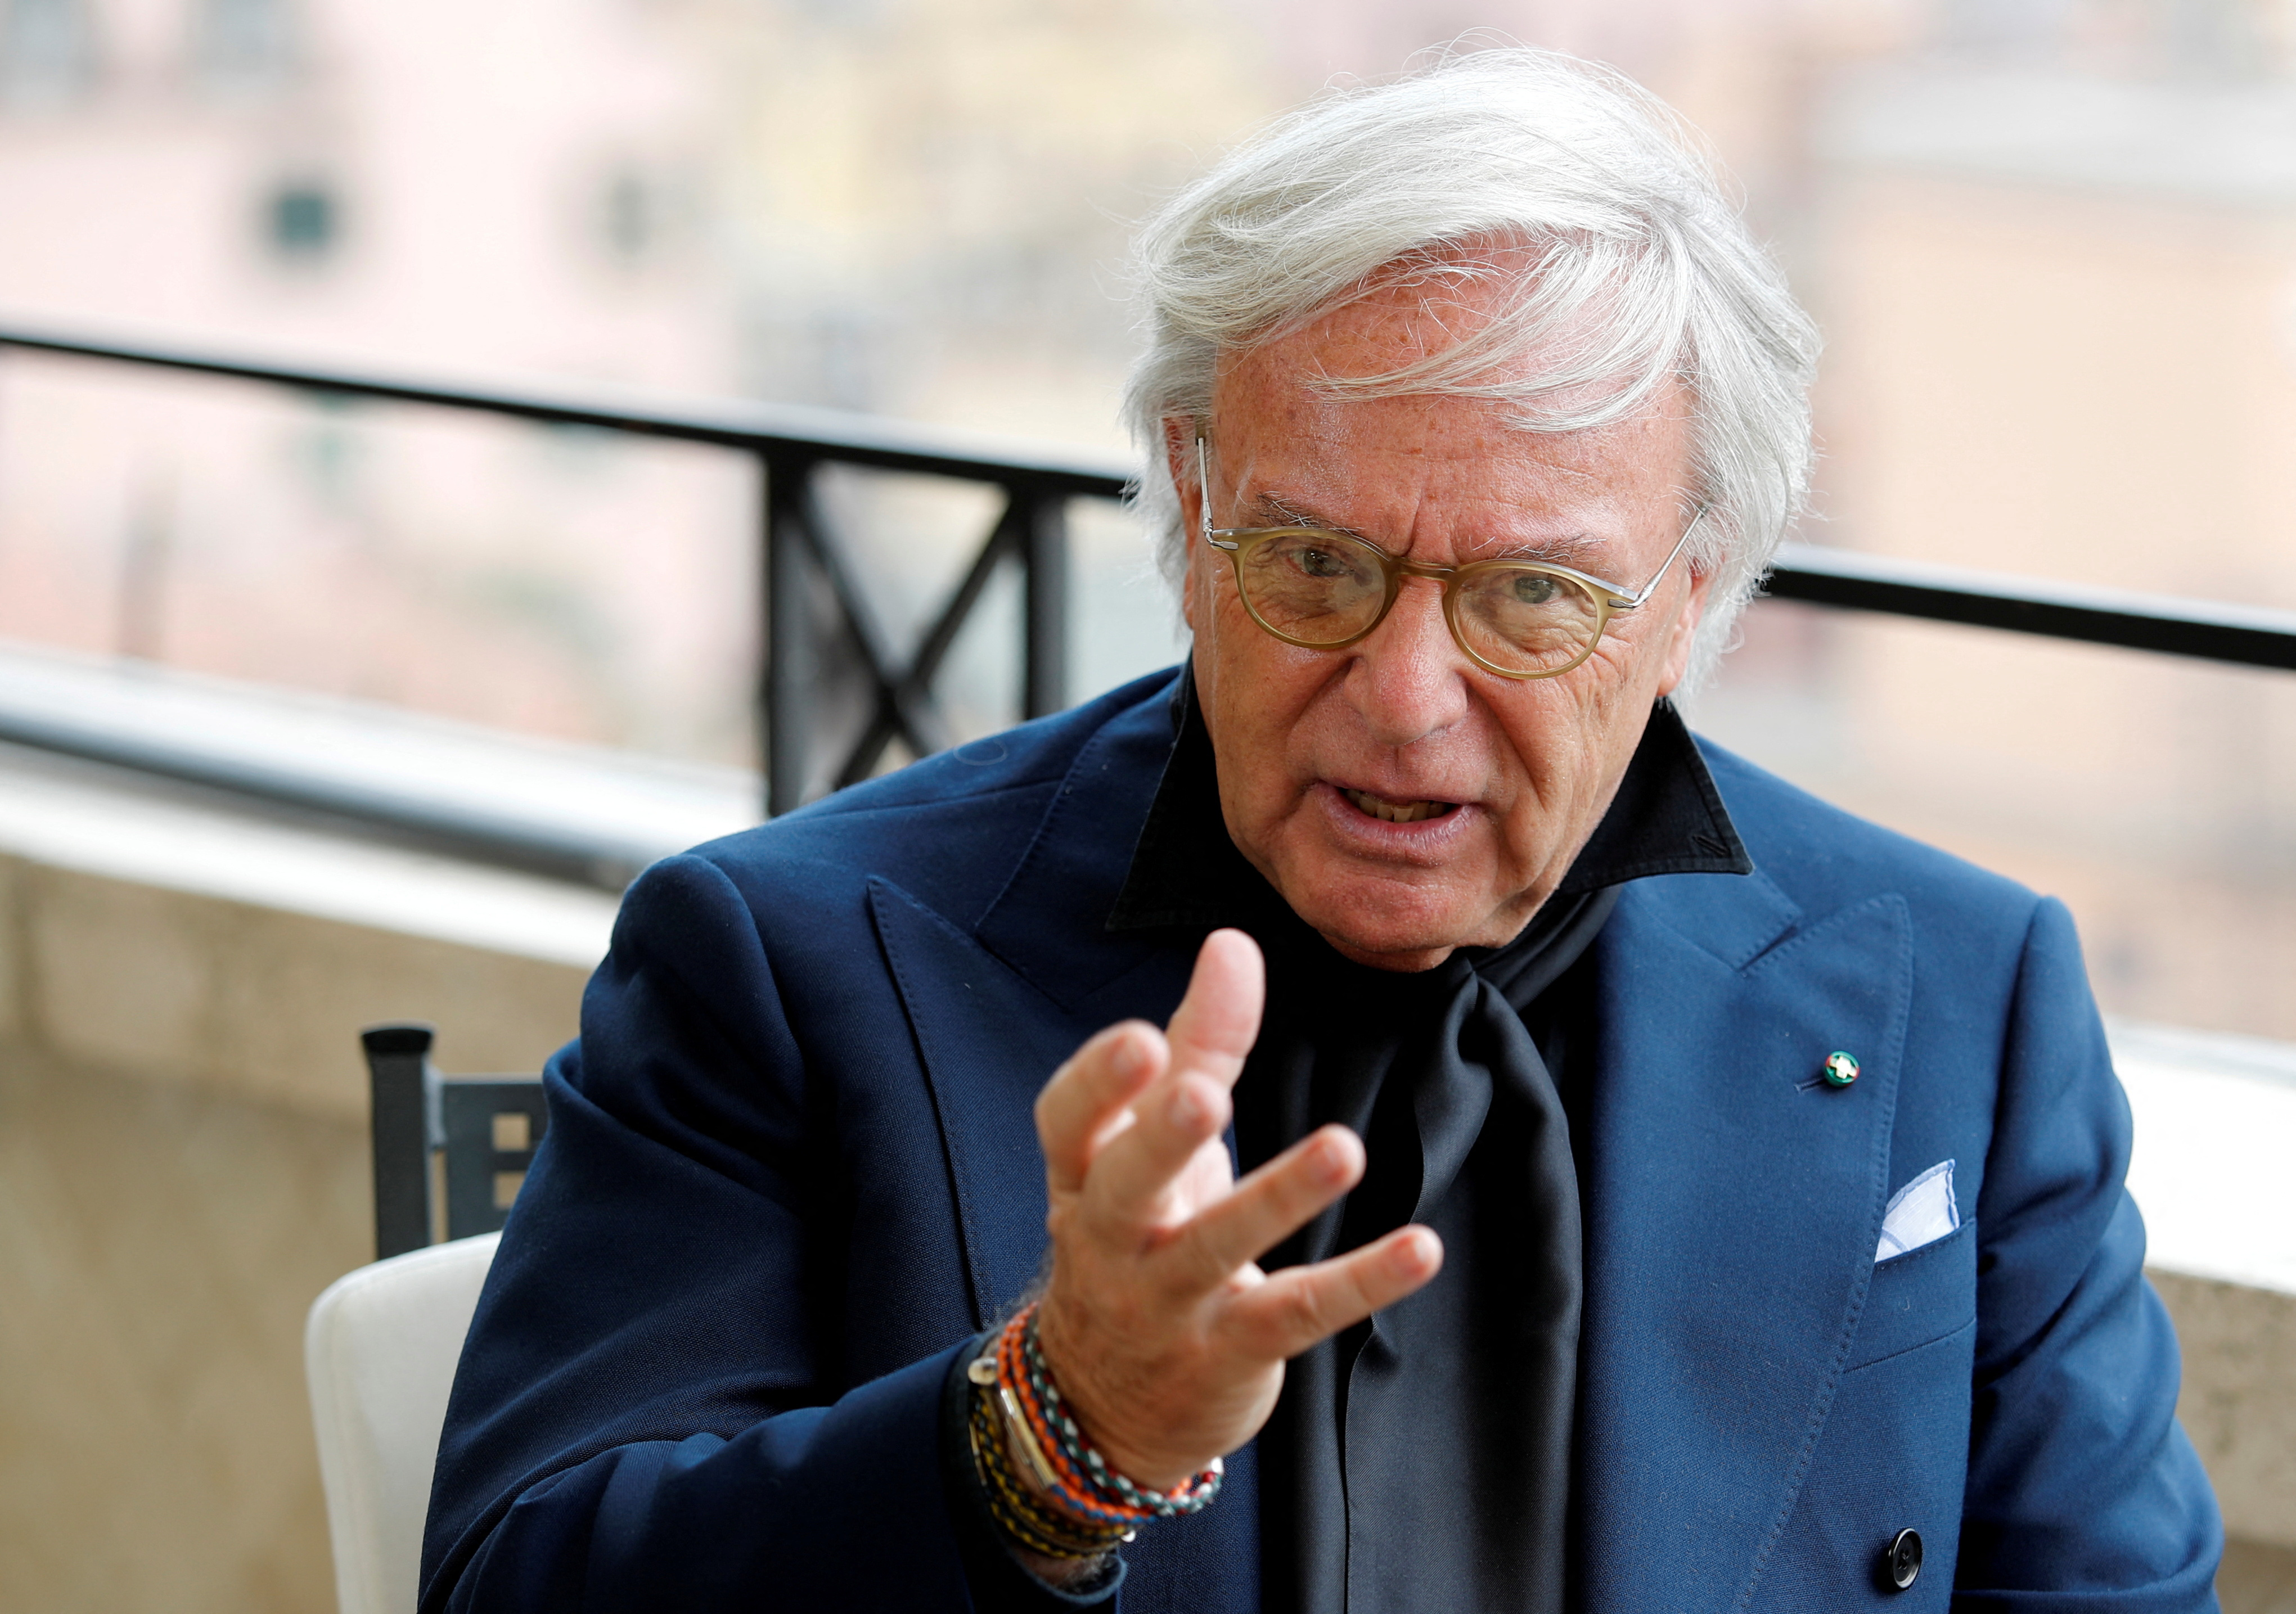 Tod's Chairman Della Valle gestures during an interview in Rome